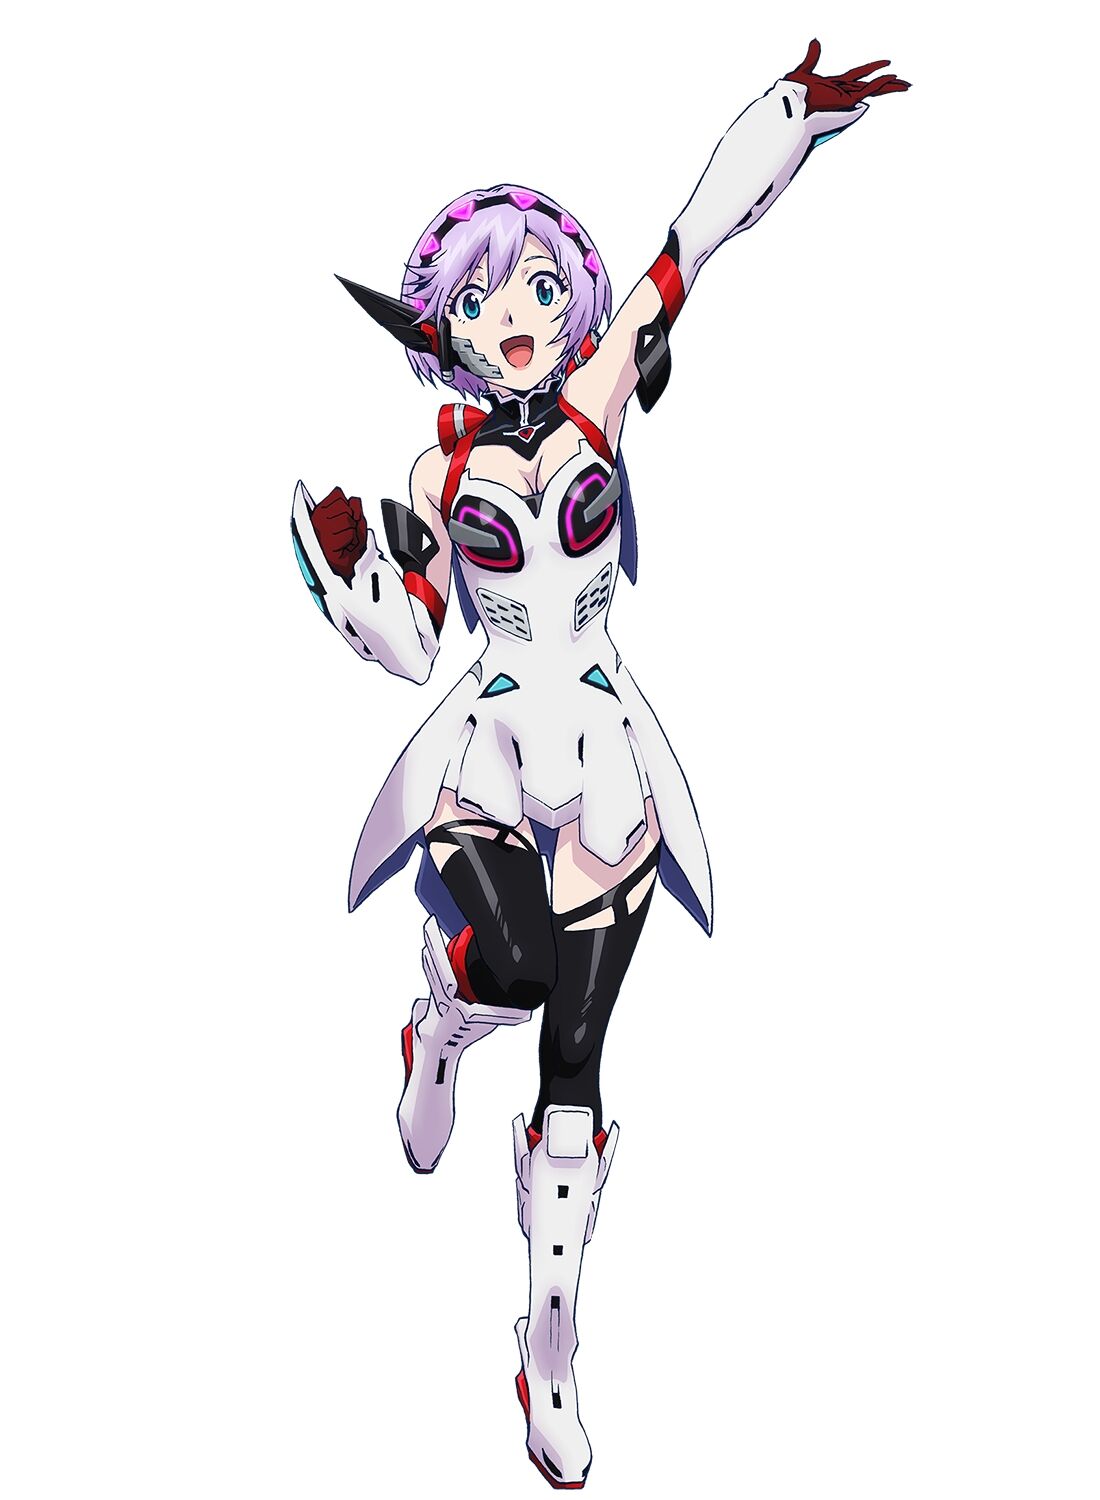 Starwing Paradox Introduces Hikari And Reika In A New Character Trailer -  Siliconera